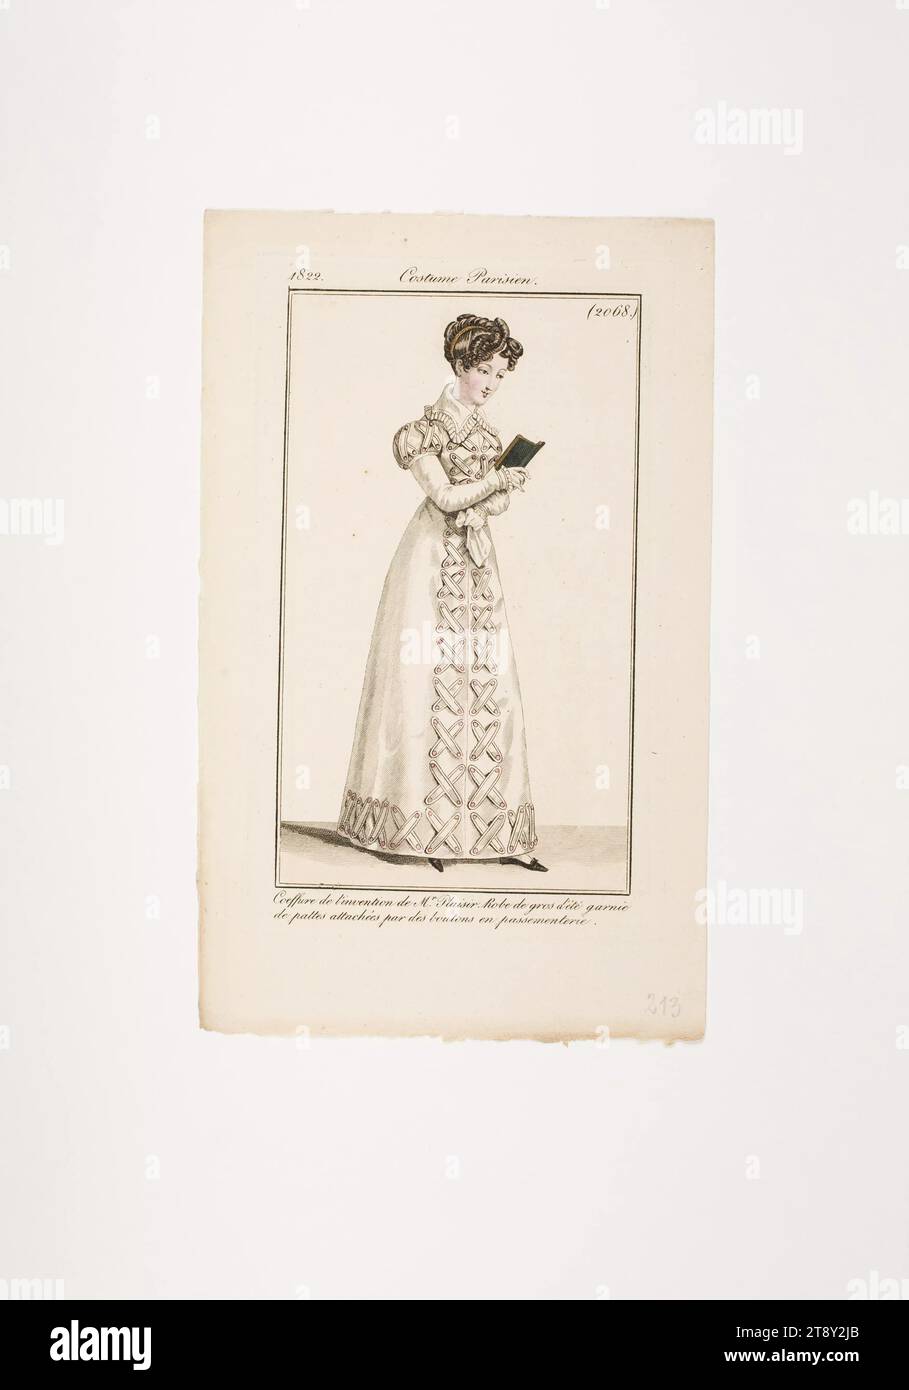 Fashion plate: 'French lady with festive hairstyle reading in a book', Unknown, 1822, paper, colorised, copperplate engraving, height 21, 5 cm, width 13, 2 cm, plate size 15, 5×9, 2 cm, Fashion, Bourgeoisie, Biedermeier, Public Festivals and Celebrations, fashion plates, head-gear, clothes for official occasions, woman, dress, gown, The Vienna Collection Stock Photo